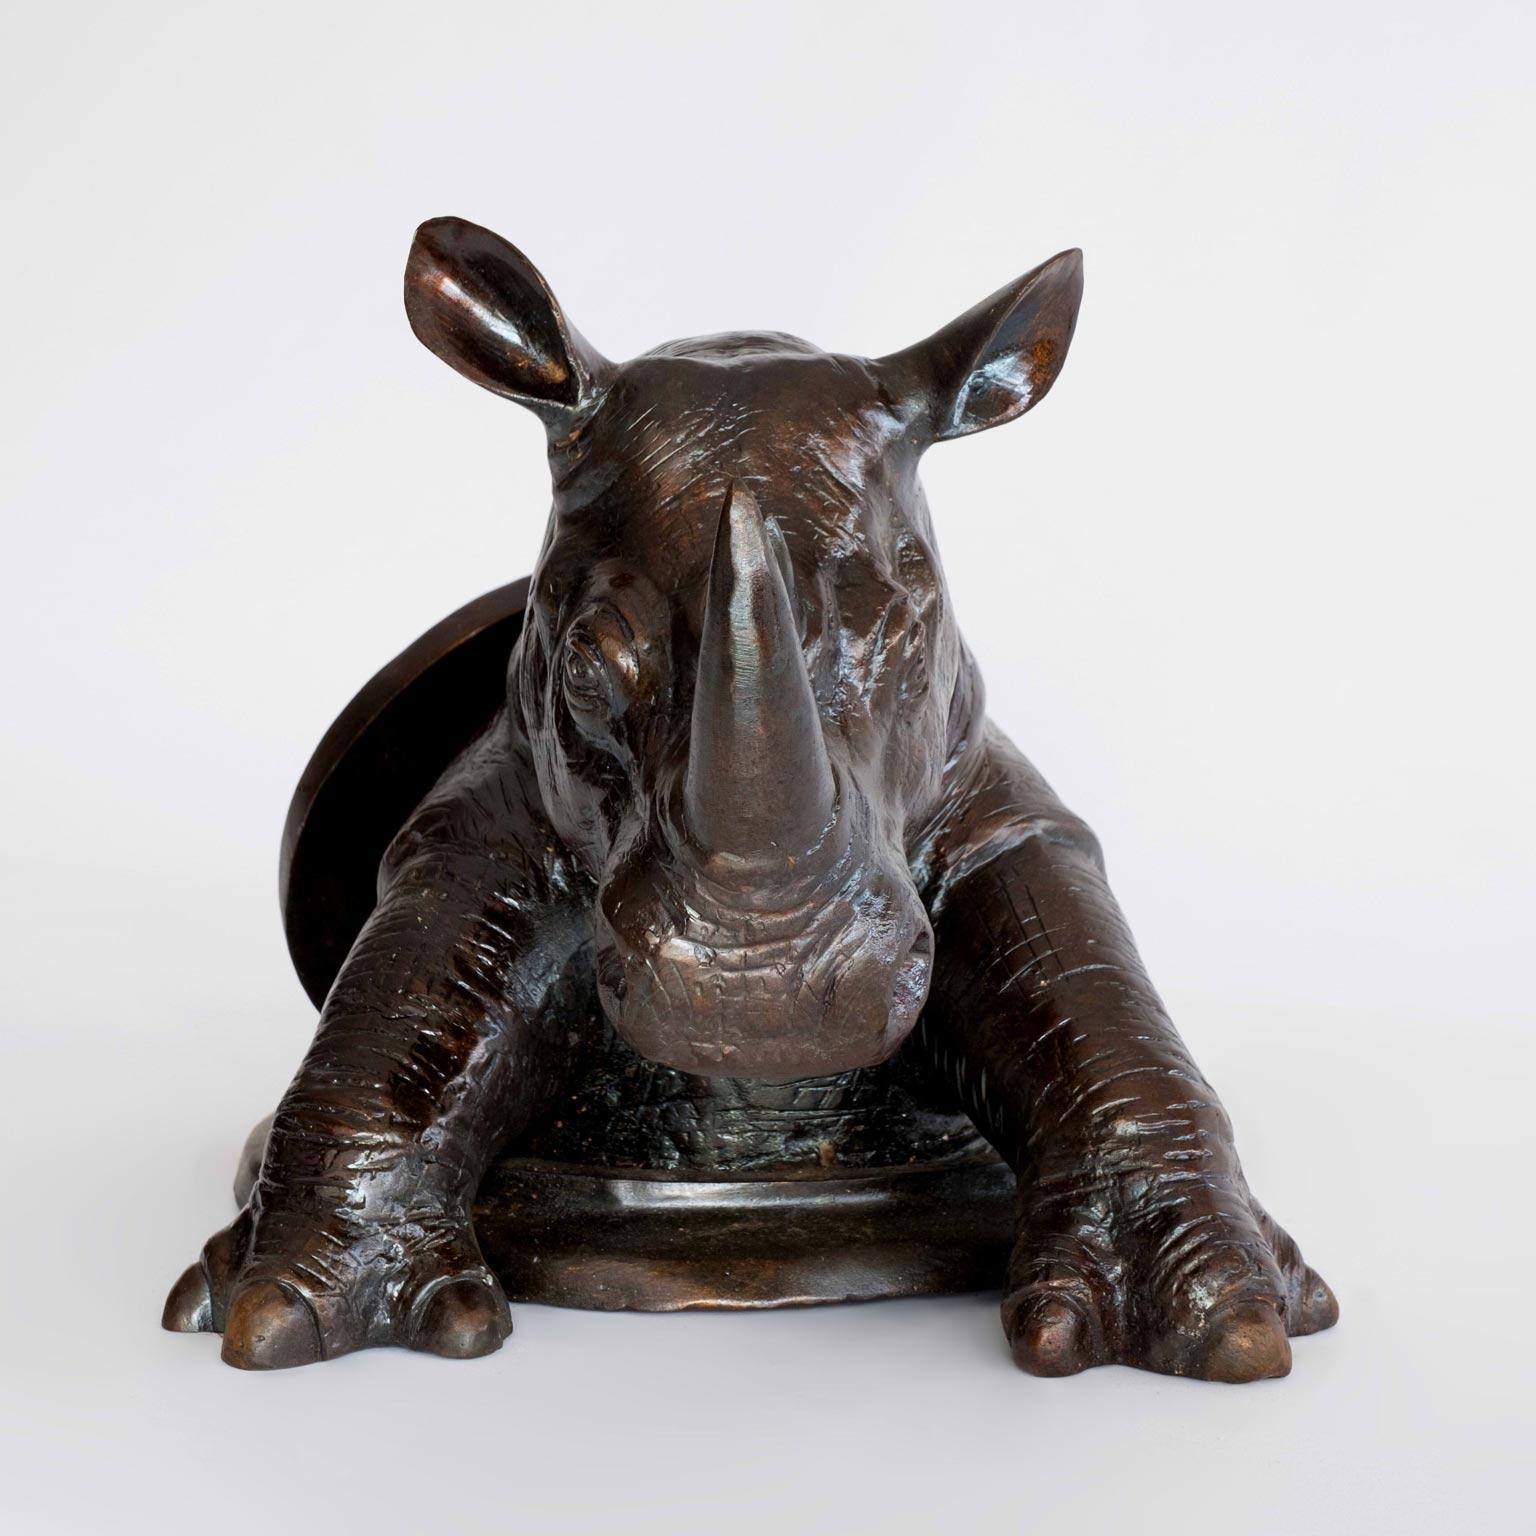 Bronze Animal Sculpture - Gillie and Marc - Limited - Rhino - Wildlife Art - Gold Figurative Sculpture by Gillie and Marc Schattner